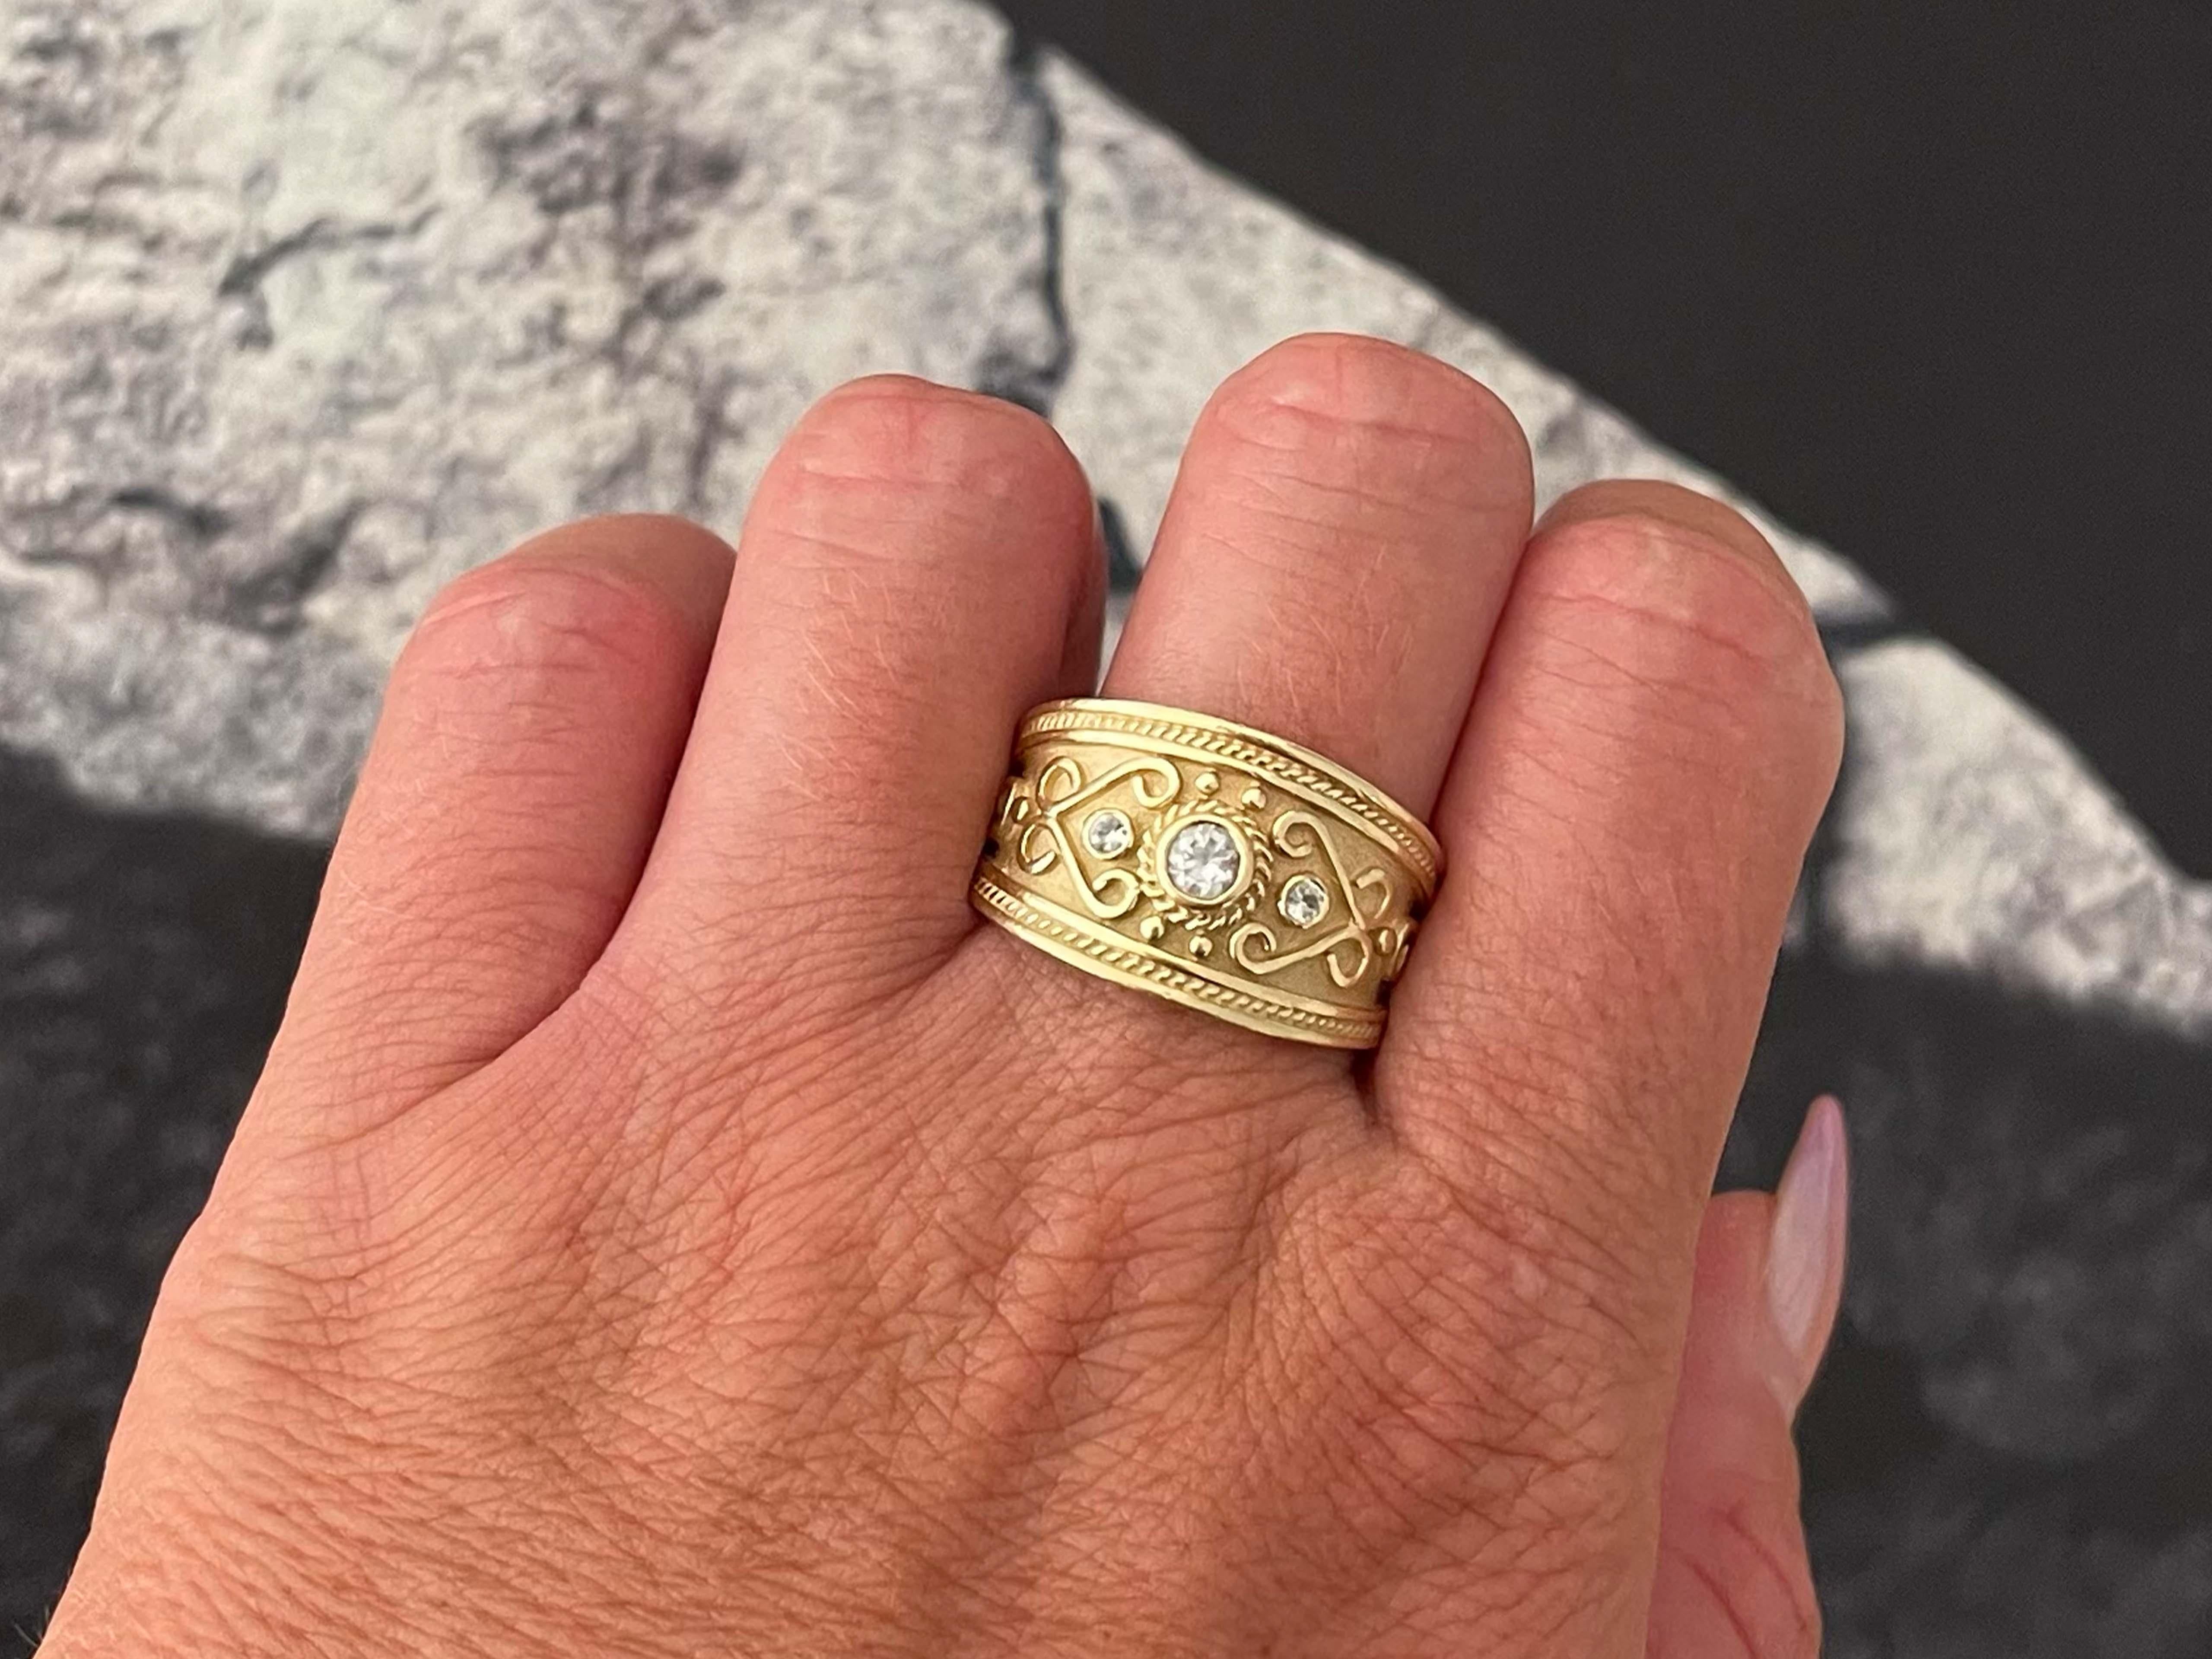 Item Specifications:

Designer: Le Vian

Metal: 14K Yellow Gold

Ring Size: 10.75 (resizing available for a fee)

Ring Height: 14.3 mm 

Total Weight: 9.5 Grams

Sapphire Count: 3

Condition: Preowned, excellent

Stamped: 